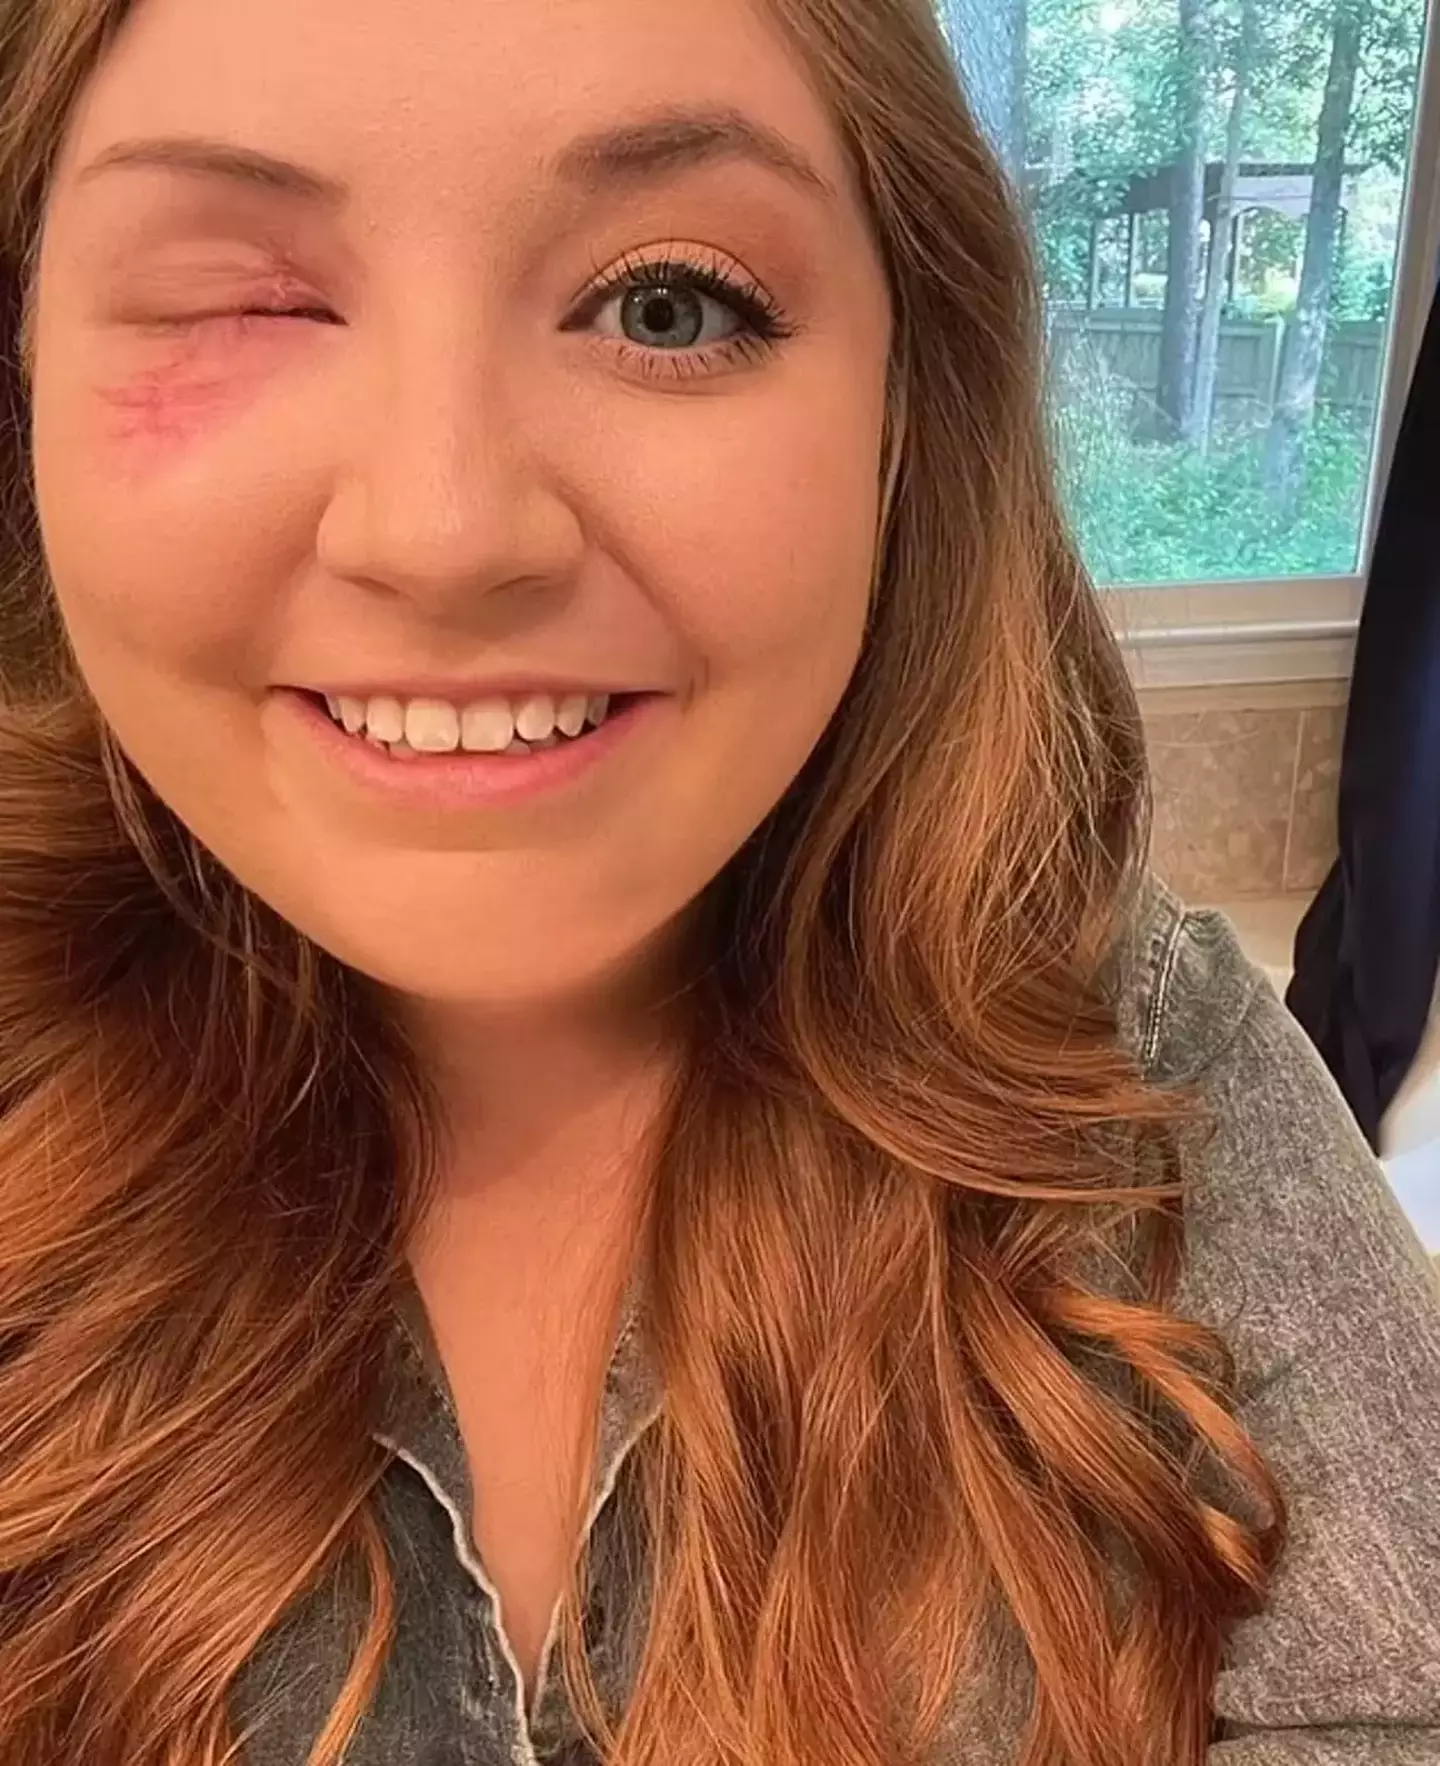 Hannah Oliver lost her eye in a 'minor car accident' back in 2021.